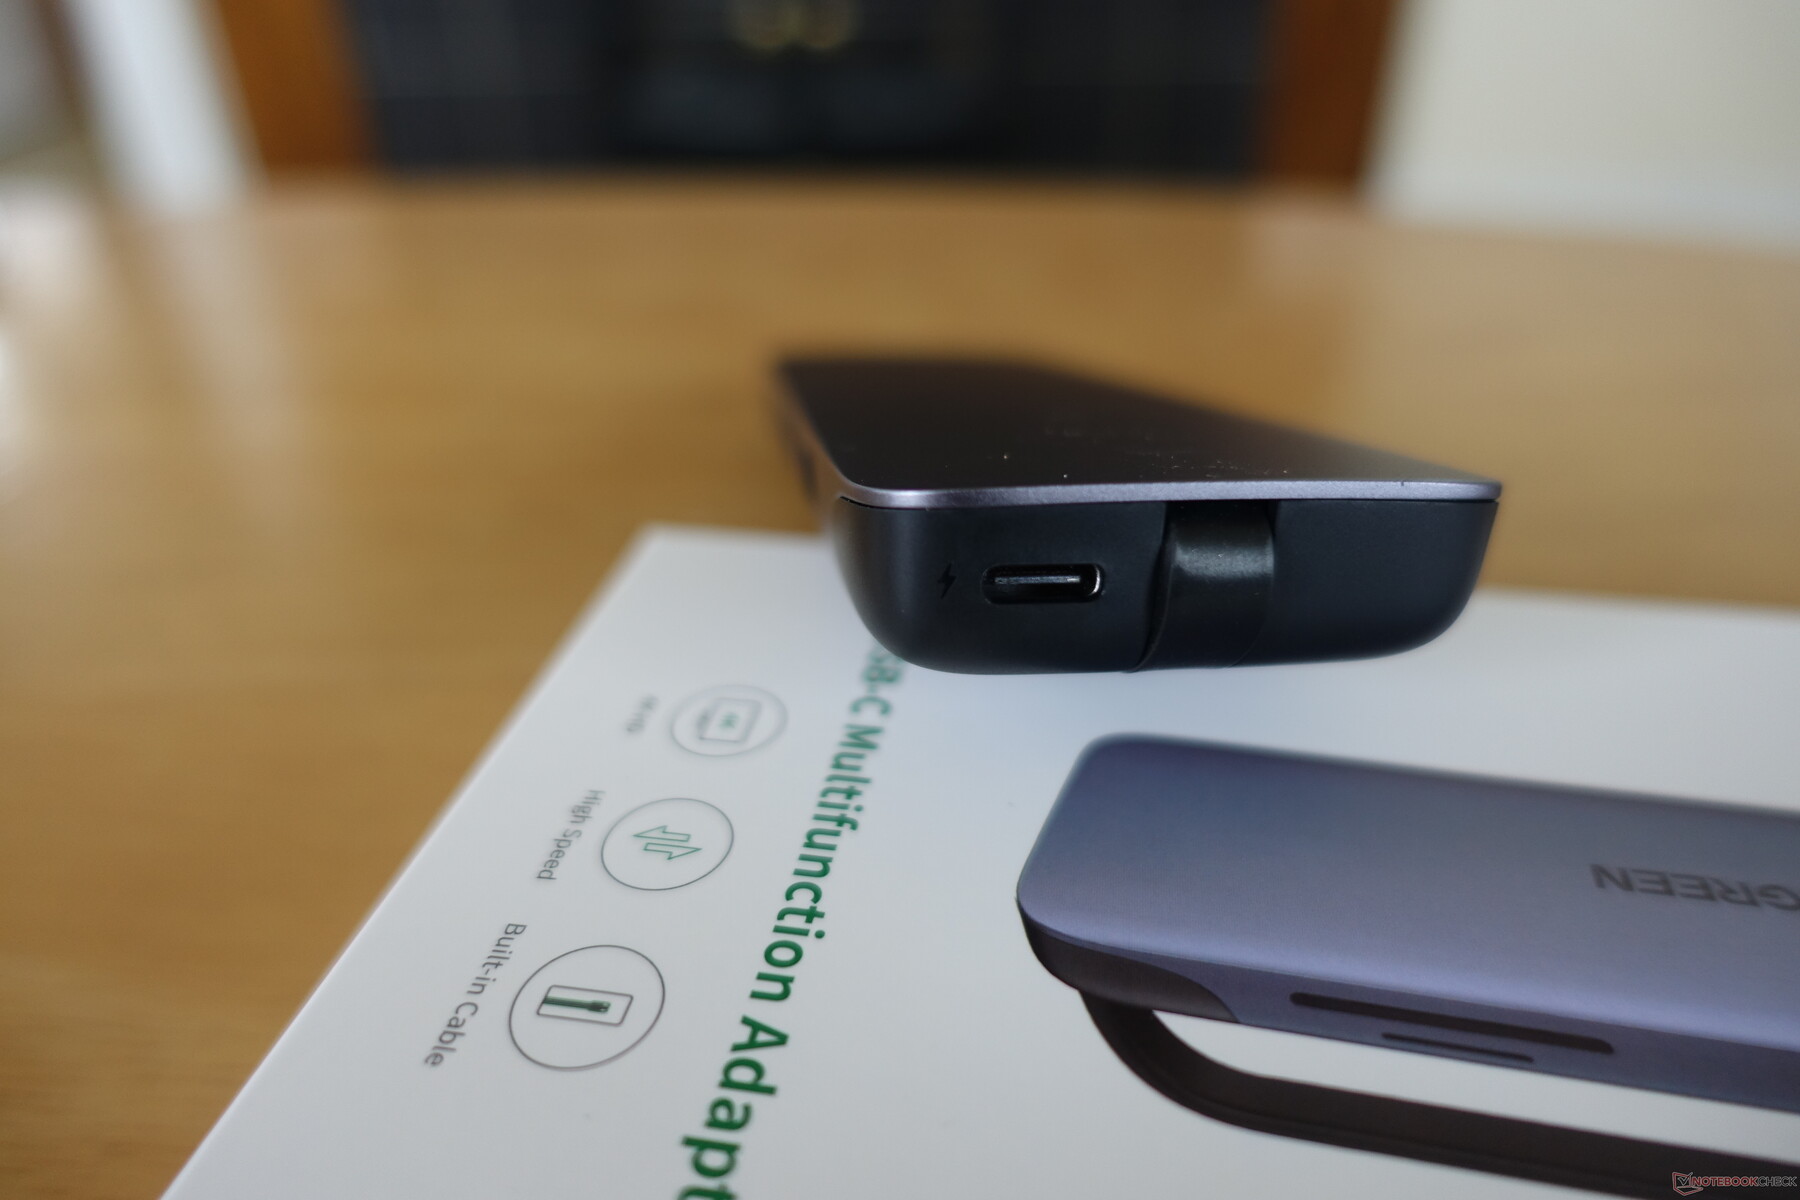 UGREEN USB C 9-in-1 Multiport Docking Station hands-on review -   News